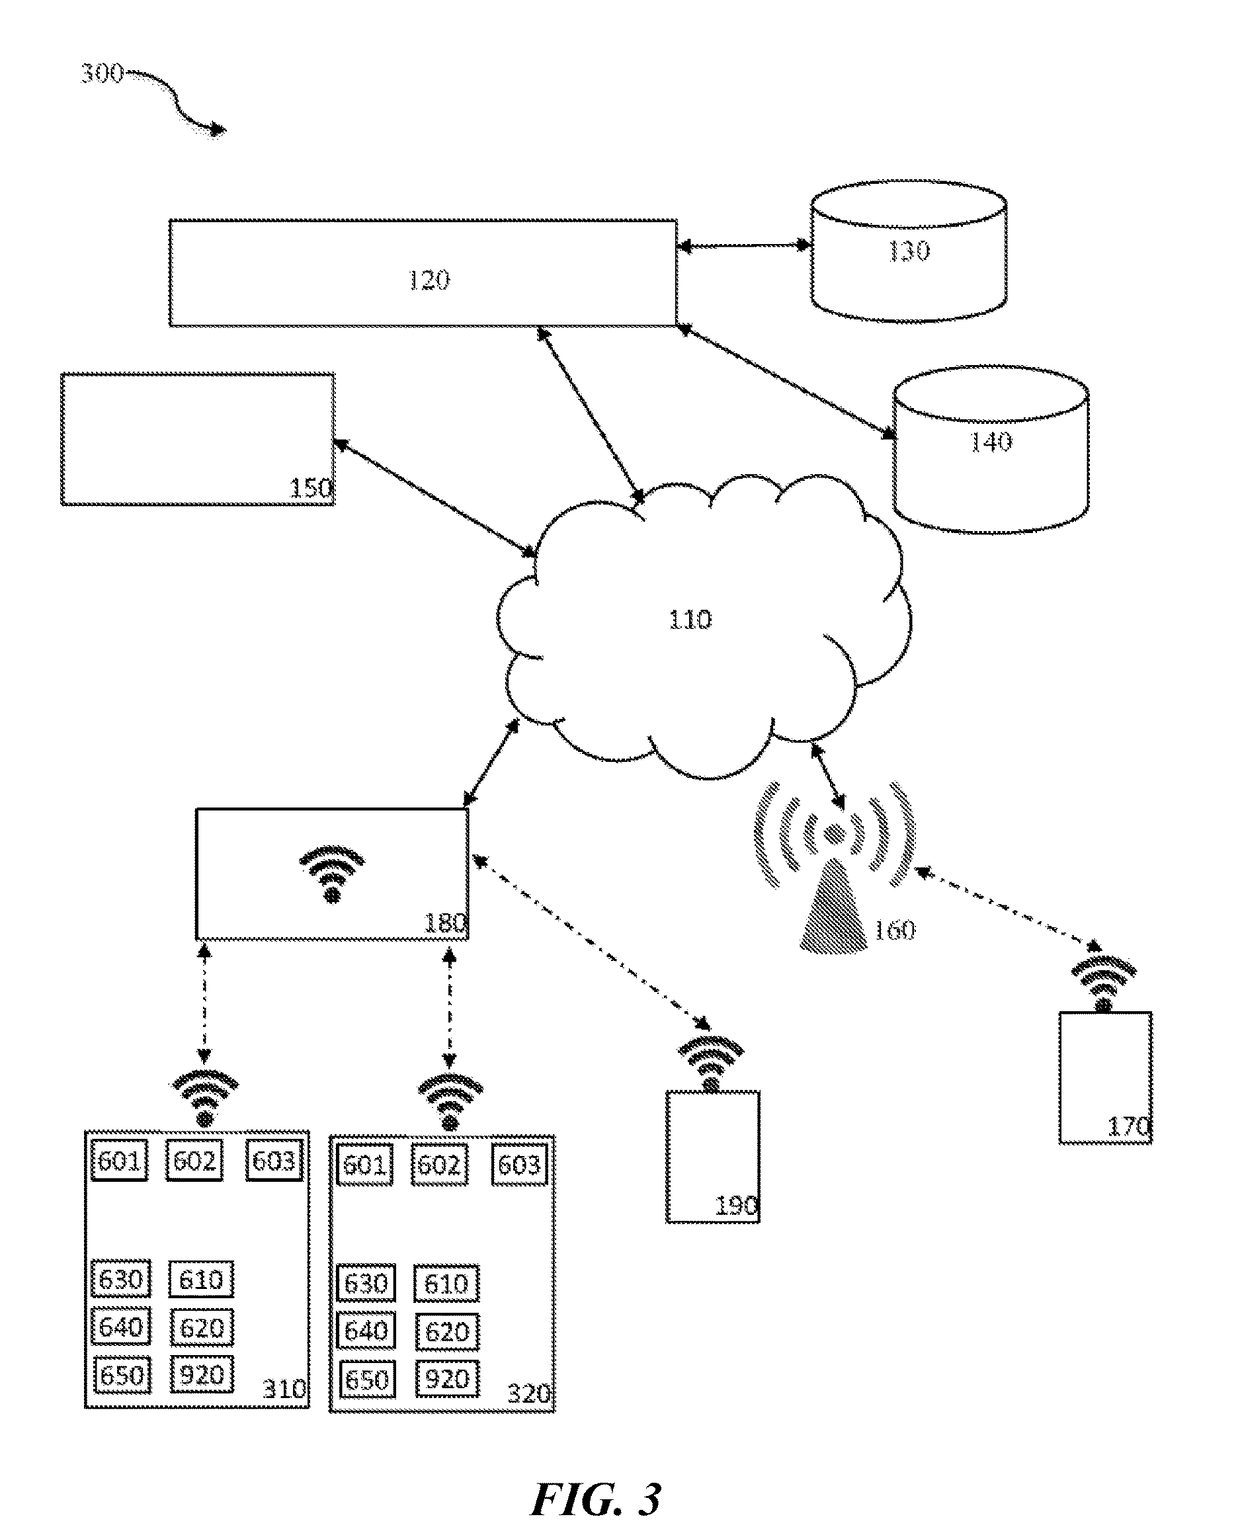 Systems and methods for automated analytics for security surveillance in operation areas